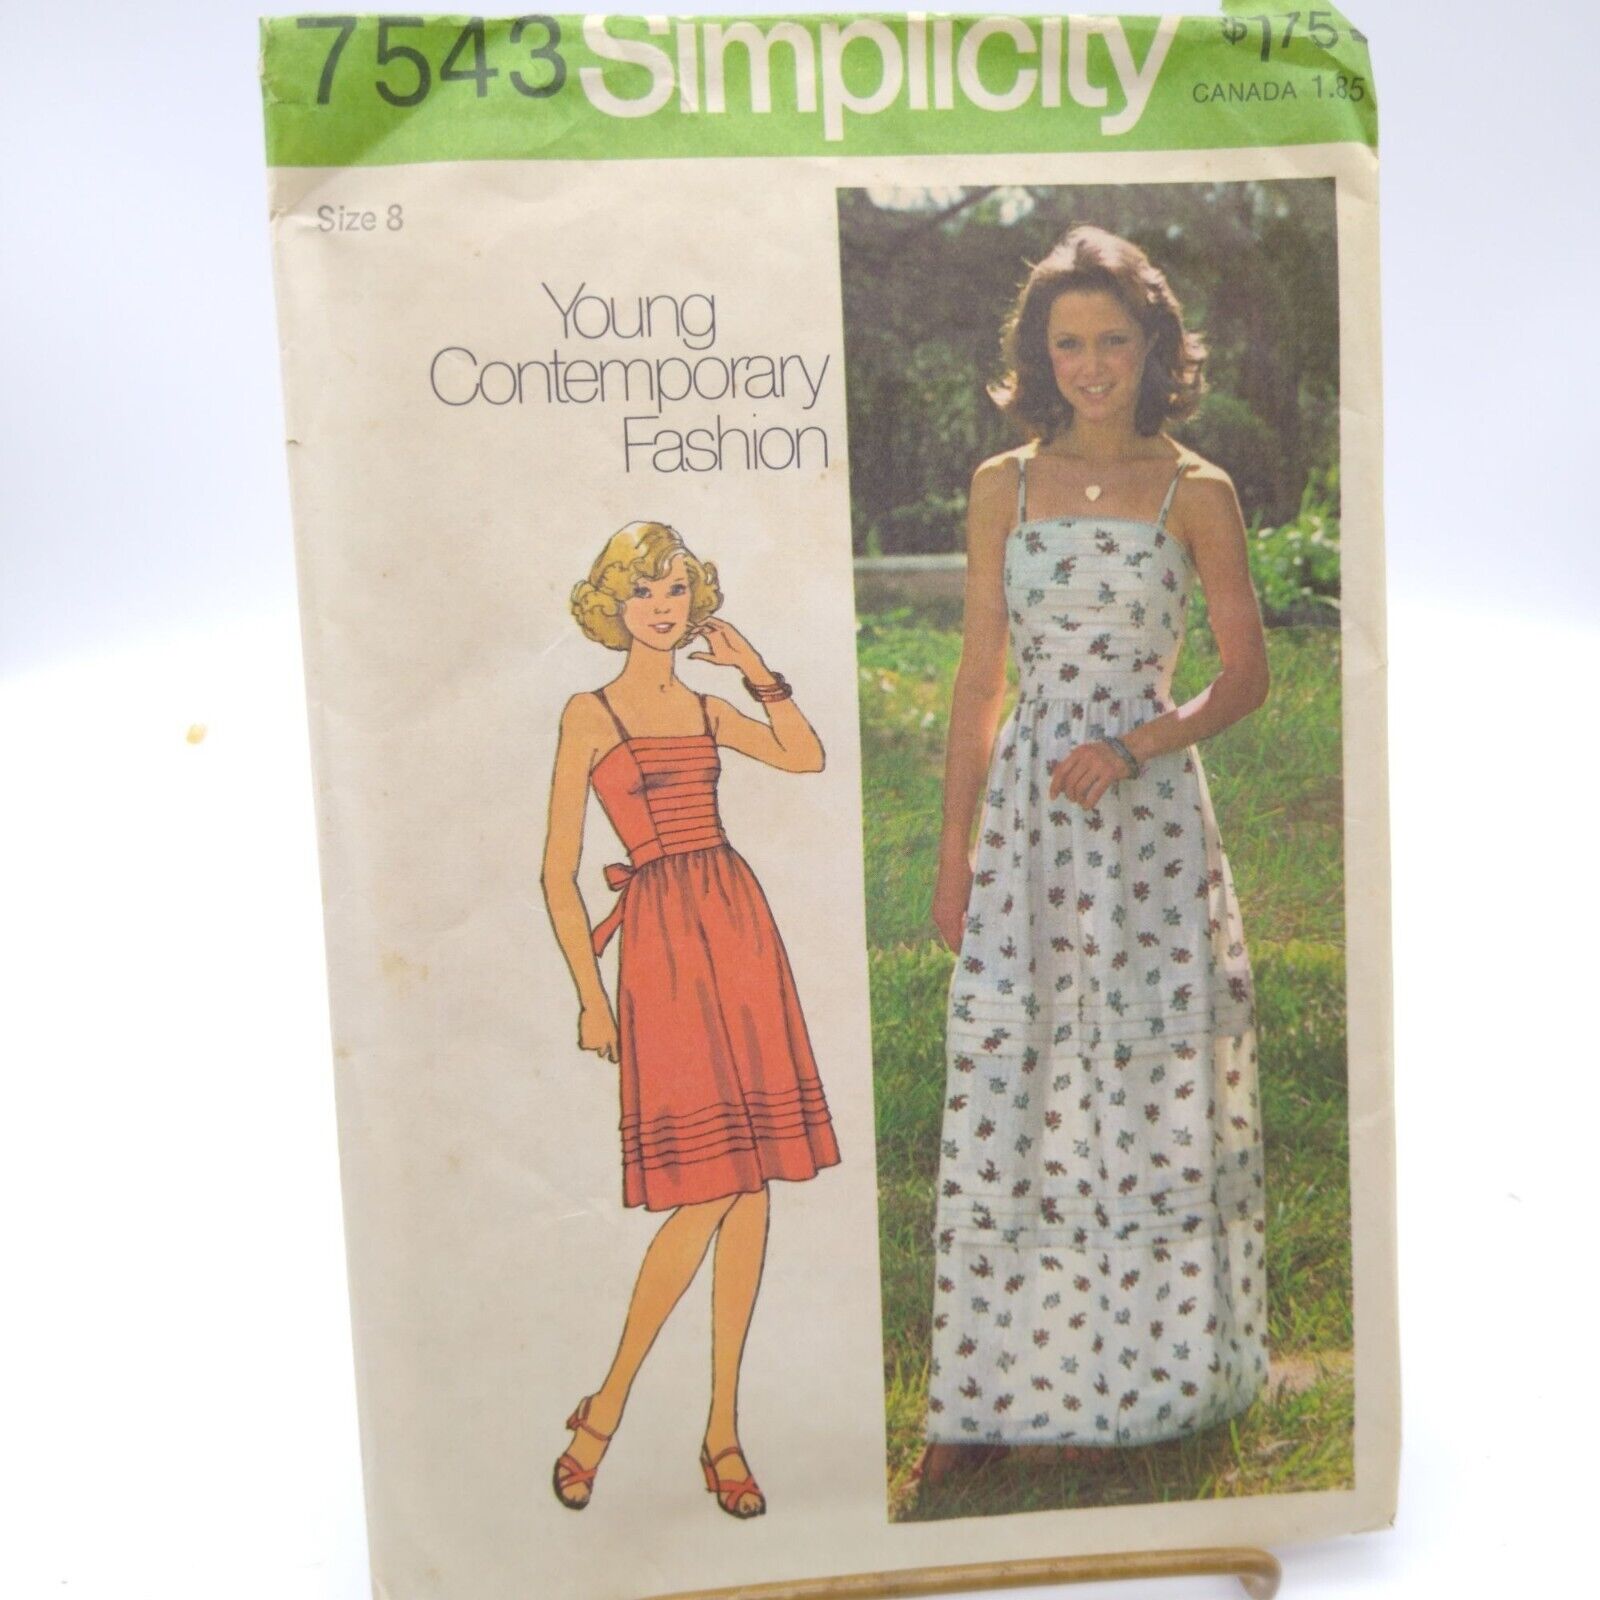 UNCUT Vintage Sewing PATTERN Simplicity 7543, Young Contemporary Fashion, Misses